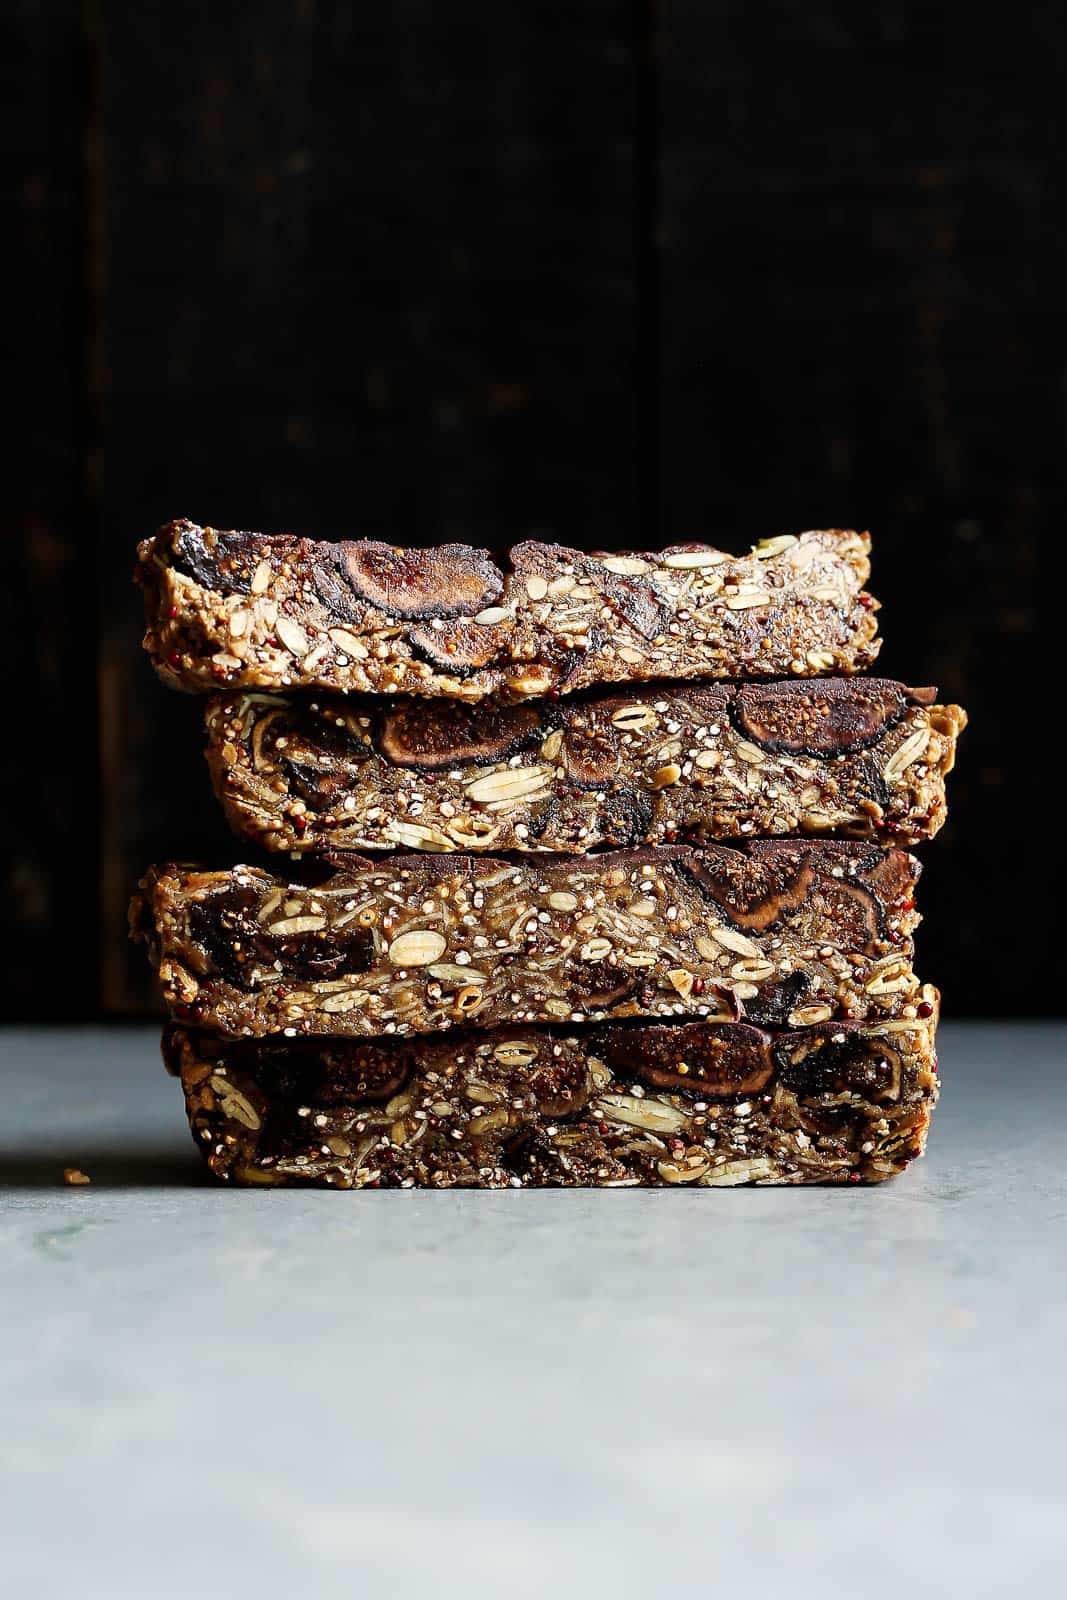 Dried figs energy bars